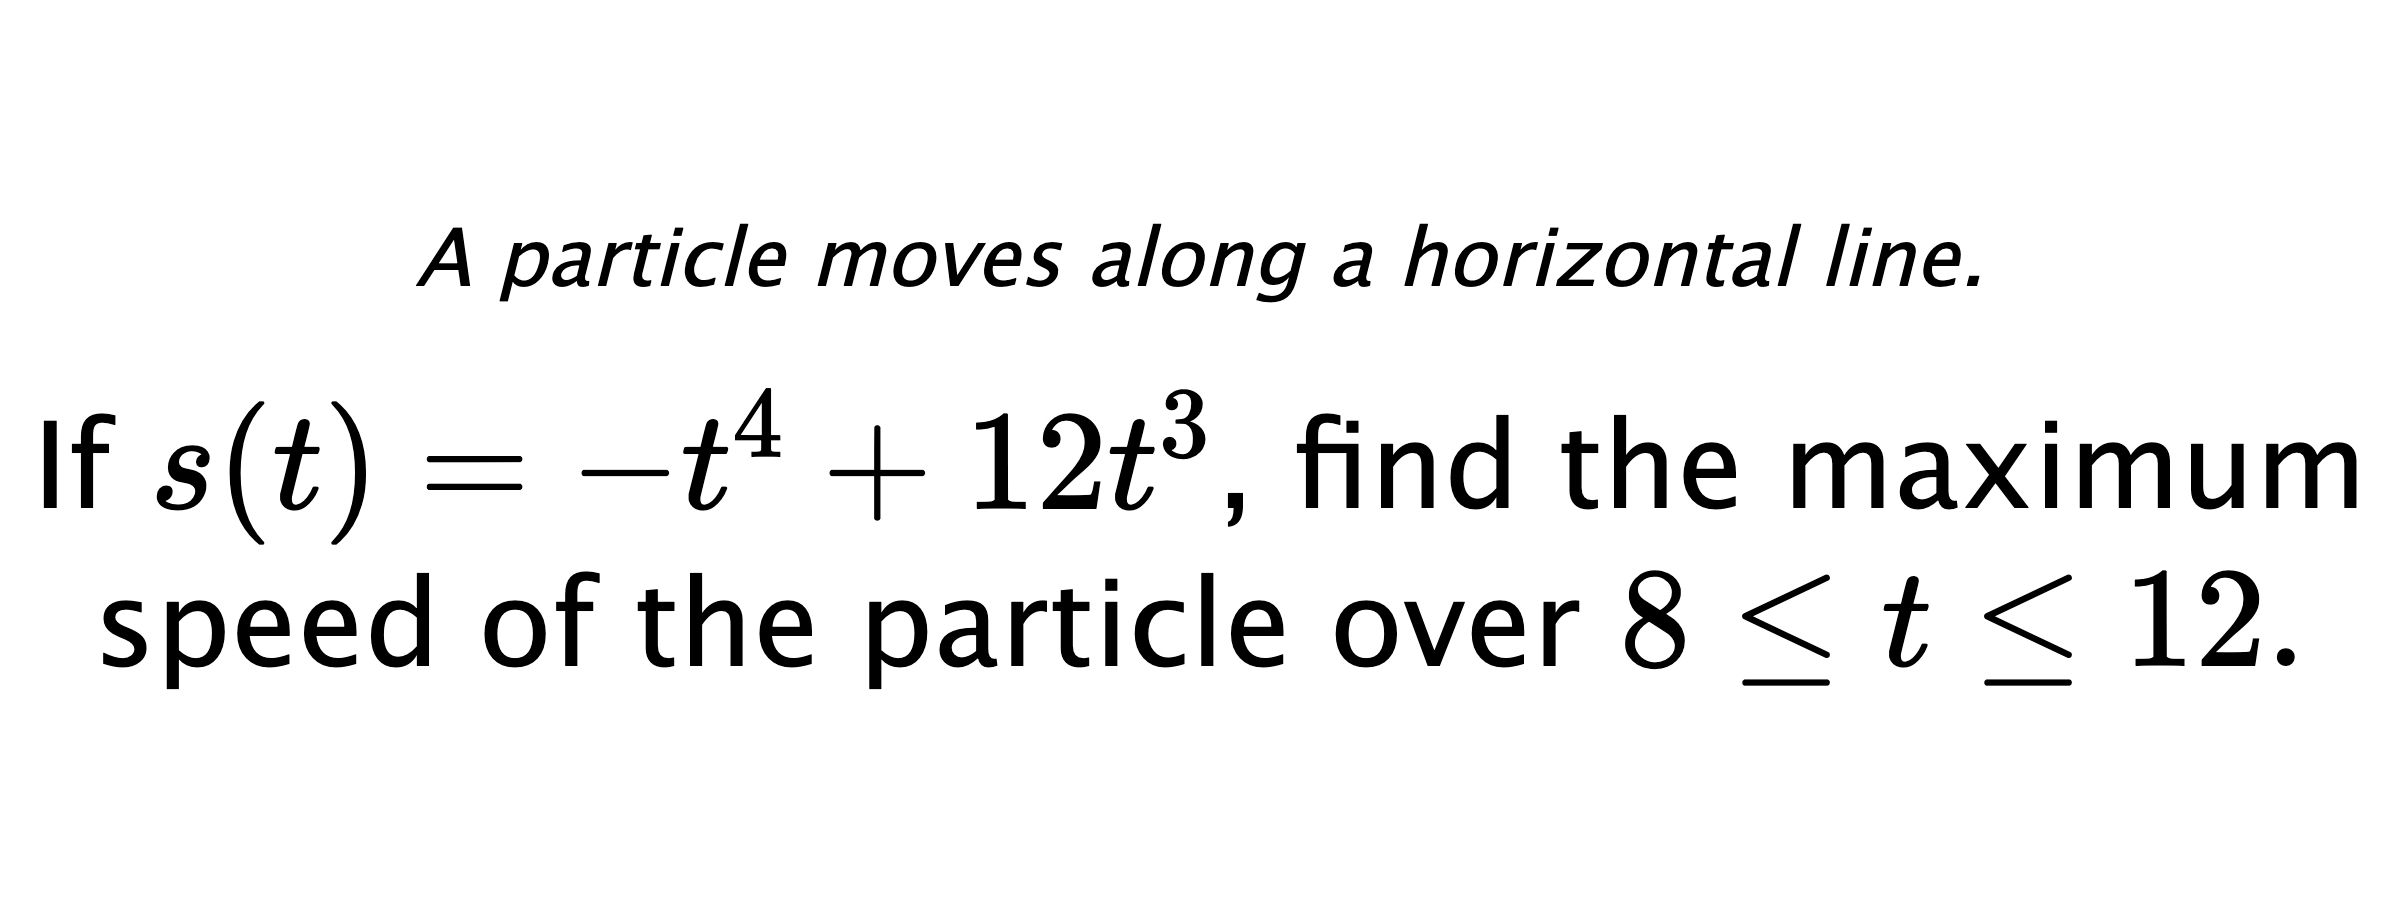 A particle moves along a horizontal line. If $ s(t)=-t^4+12t^3 $, find the maximum speed of the particle over $ 8 \leq t \leq 12. $